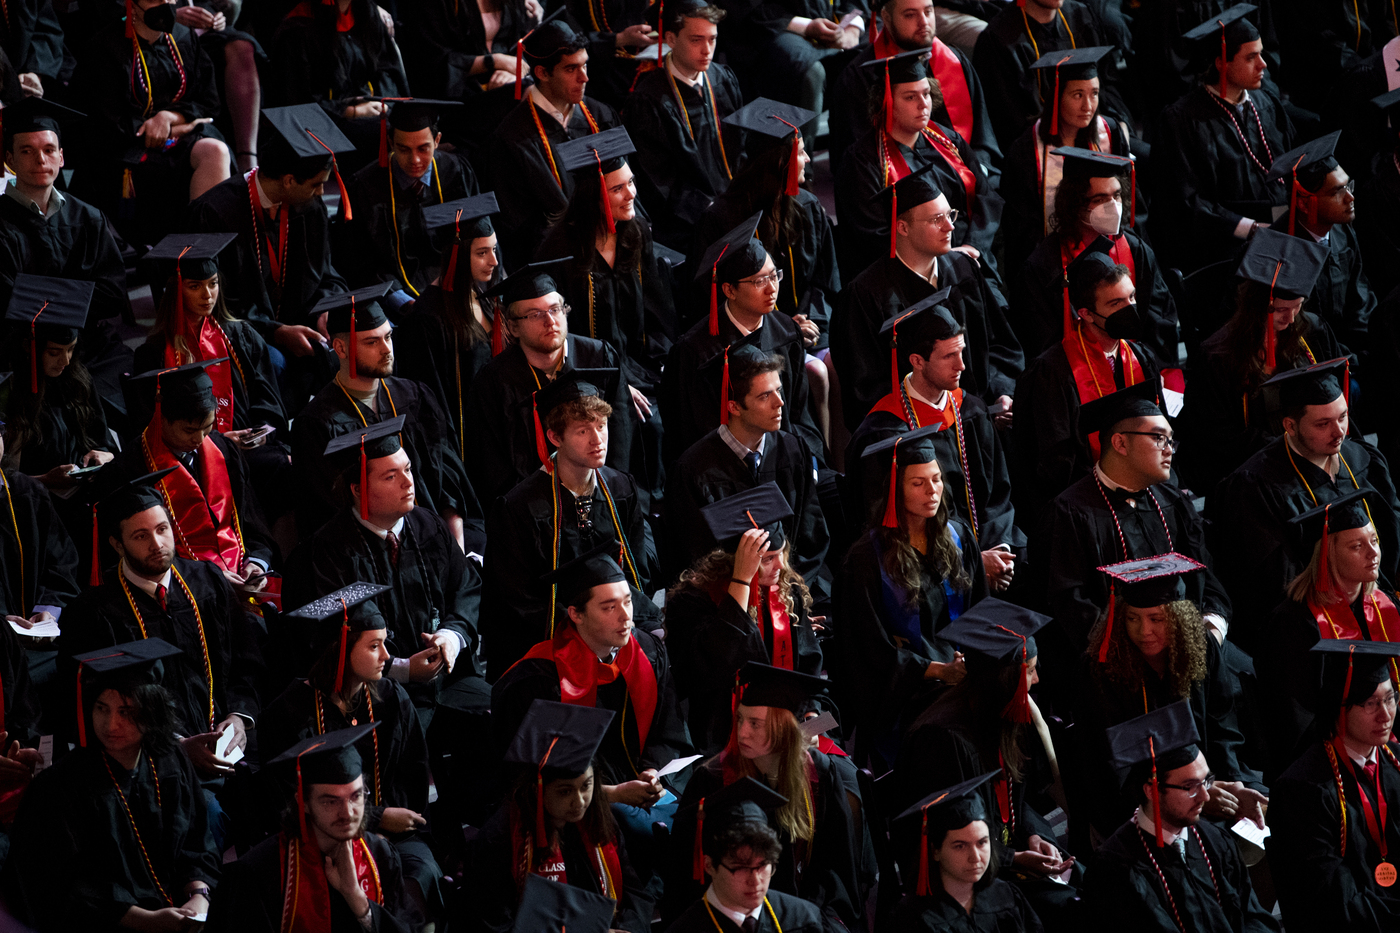 Why Do Graduates Wear Caps and Gowns?